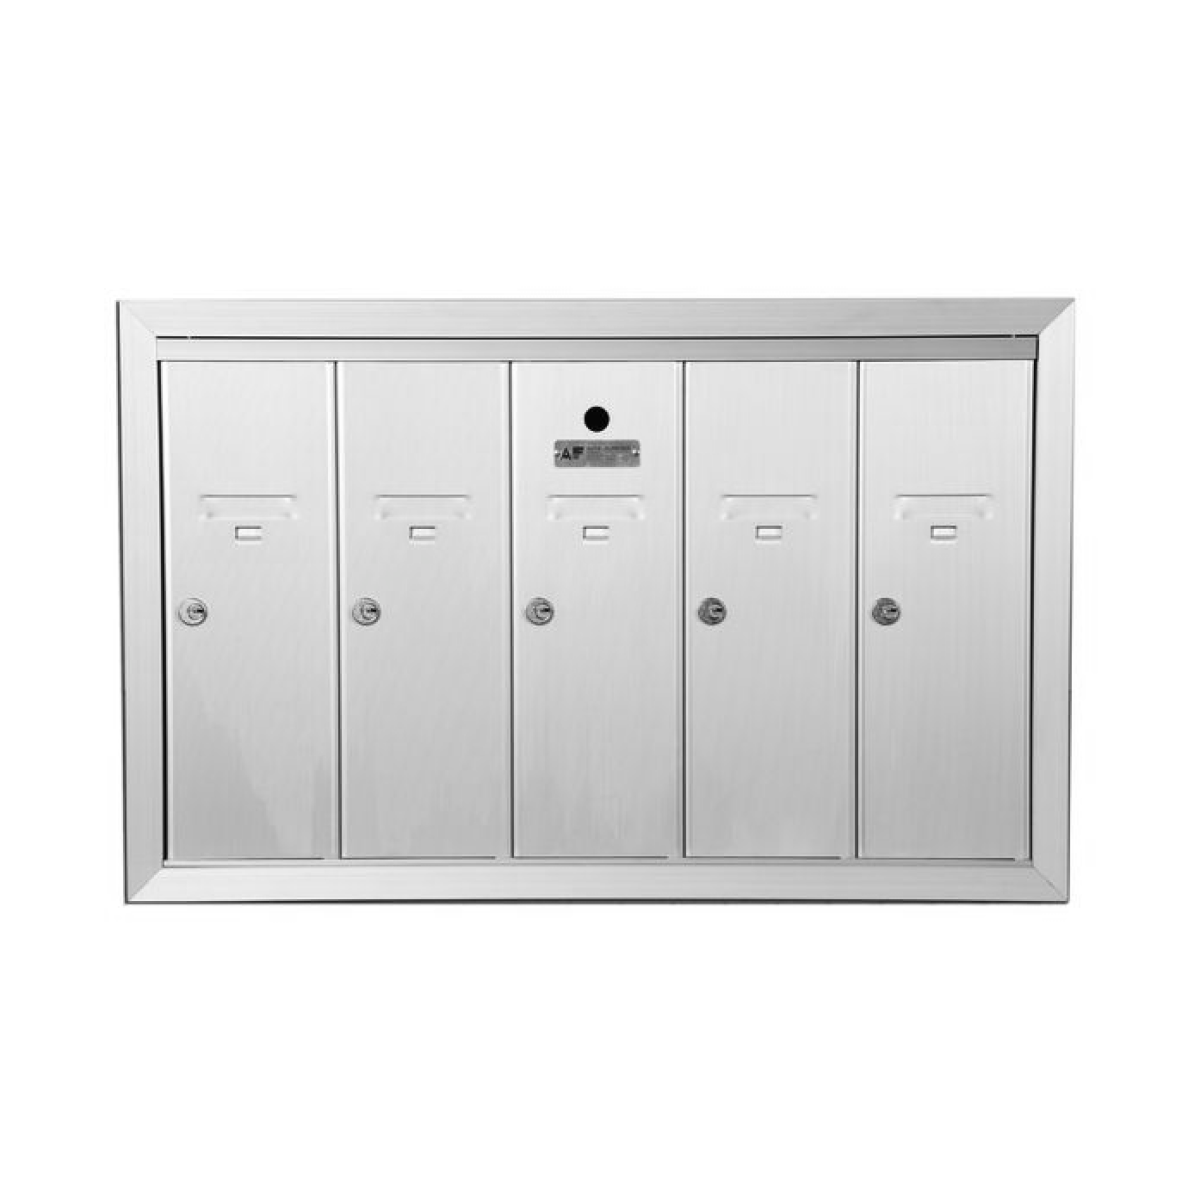 Anodized Aluminum Florence 5 Door Vertical Mailbox Product Image